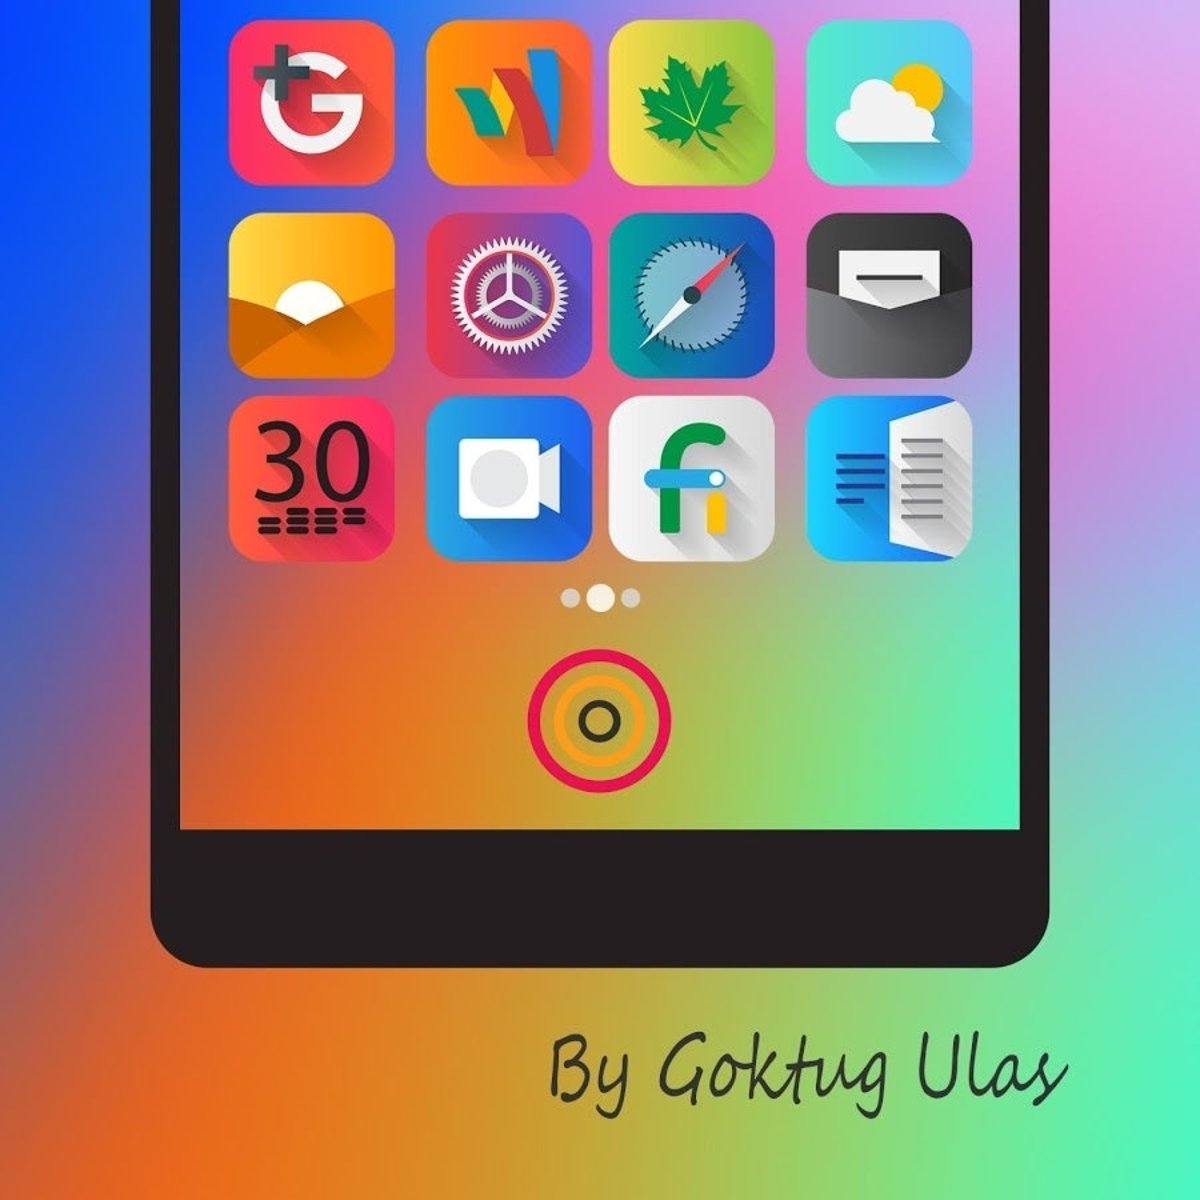 graby icon pack